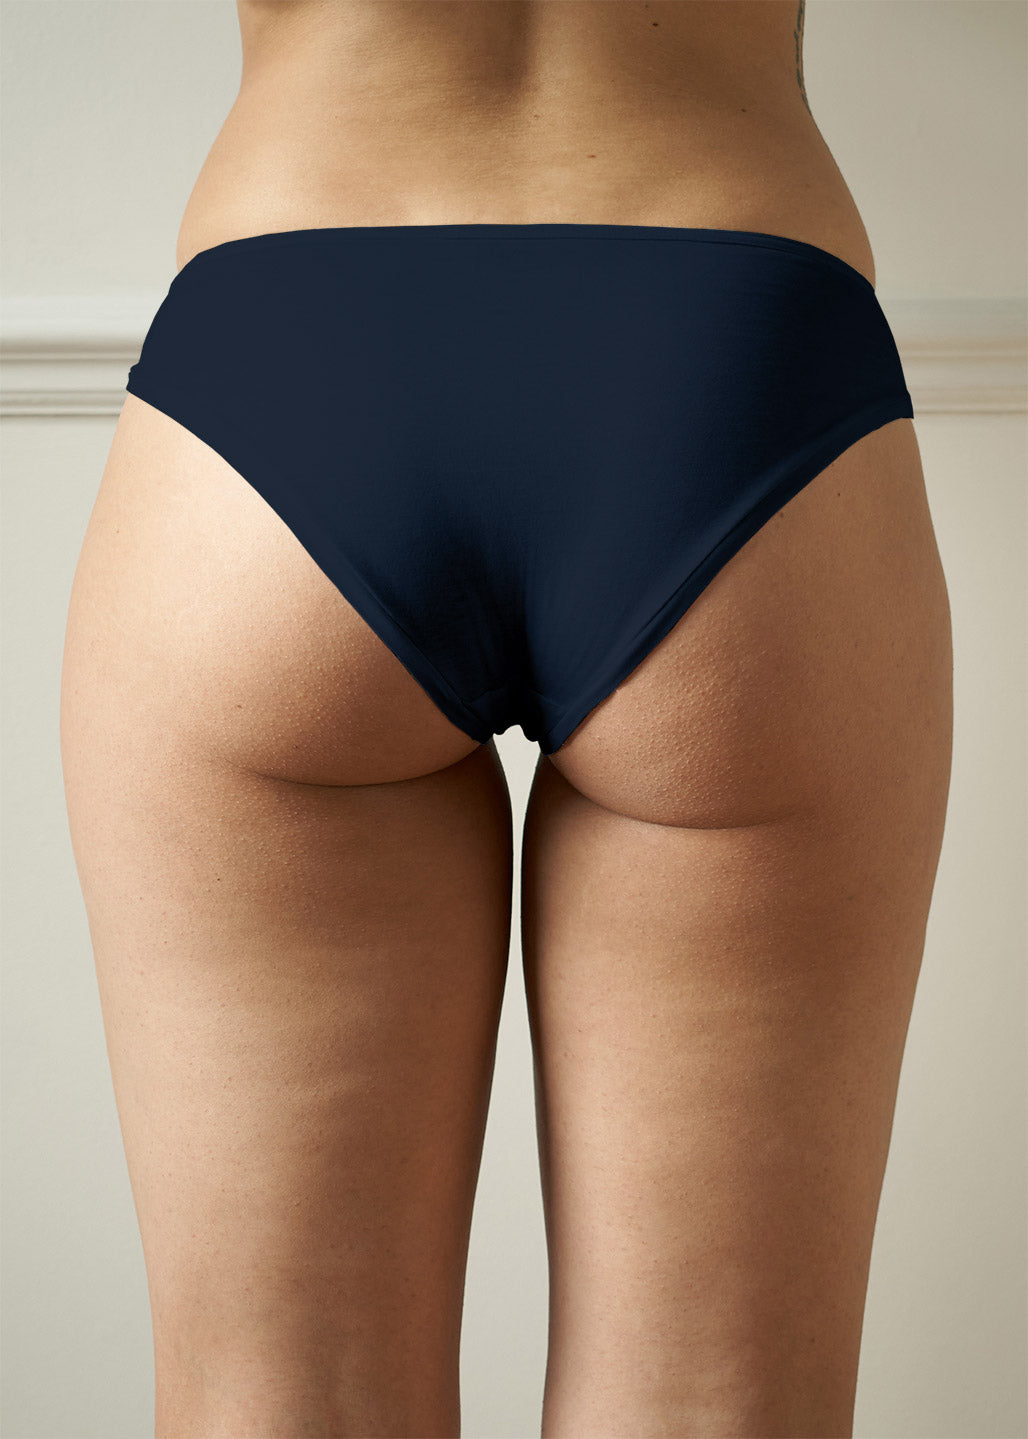 organic navy mid rise woman's briefs back facing